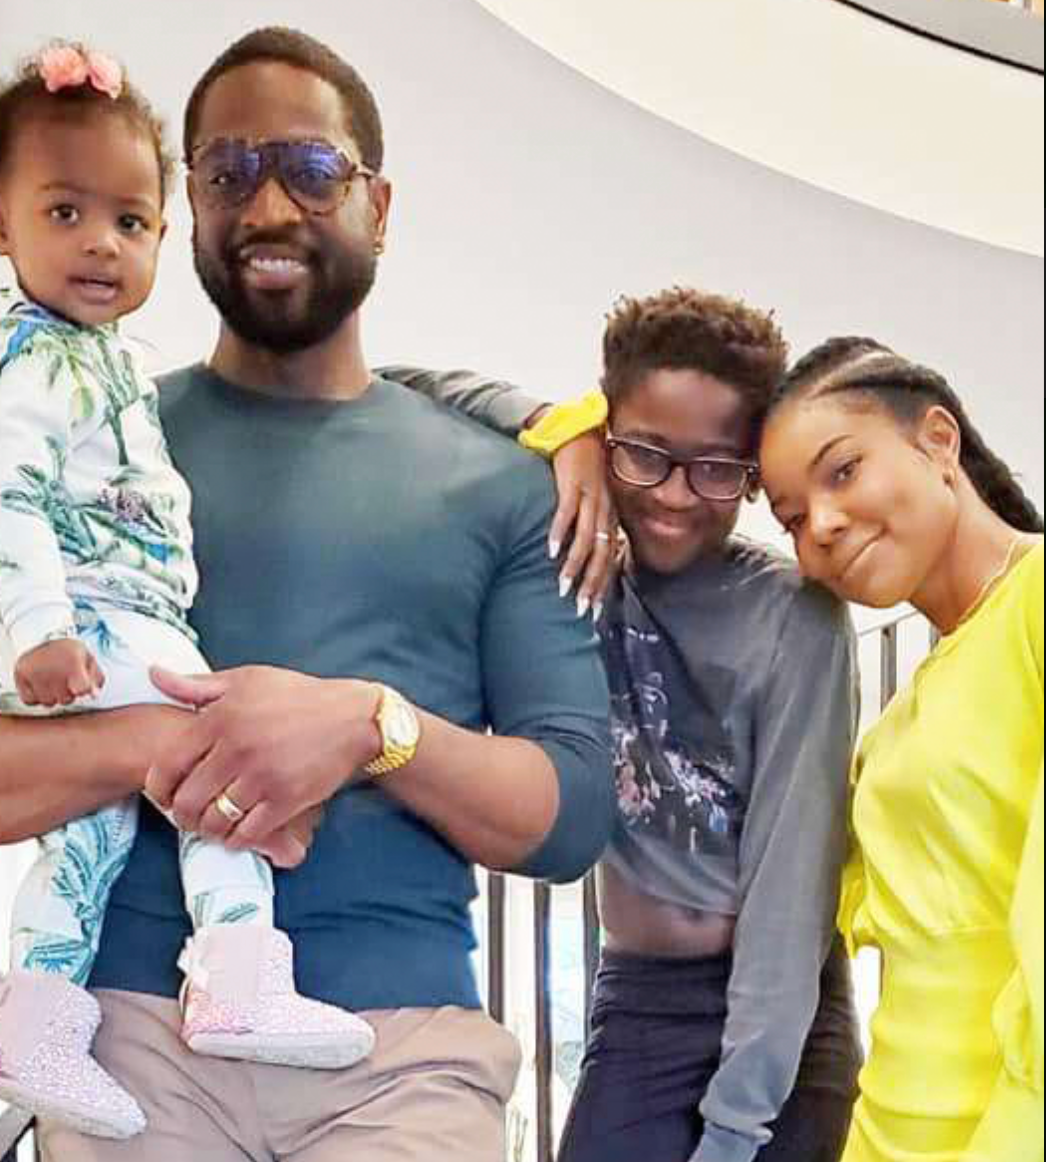 Dwyane Wade says he left Florida because family 'wouldn't be accepted